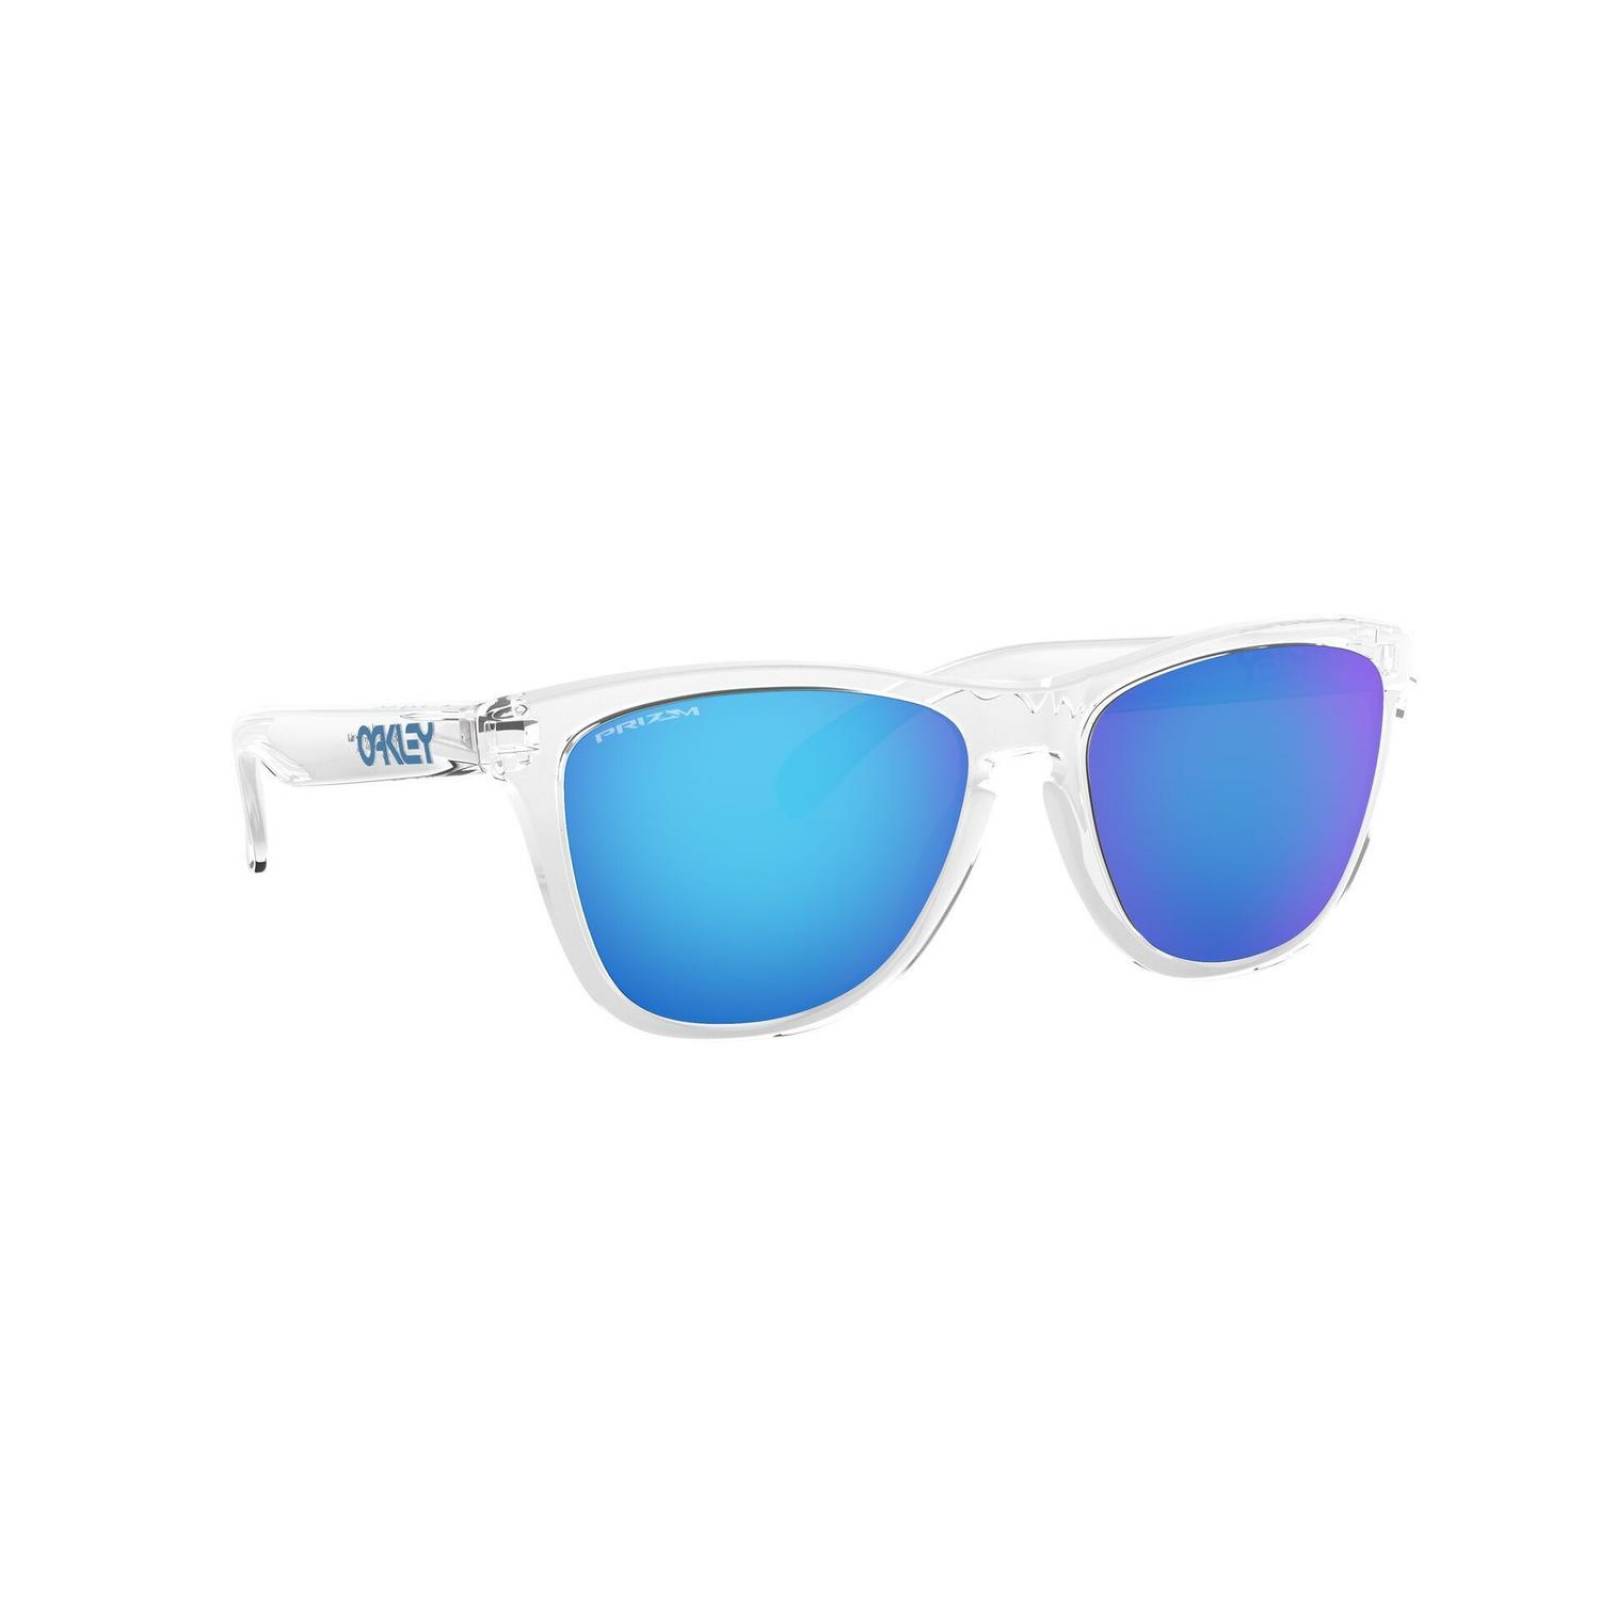 Oakley Frogskins Crystal Clear - Prizm Sapphire OO9013-D0 